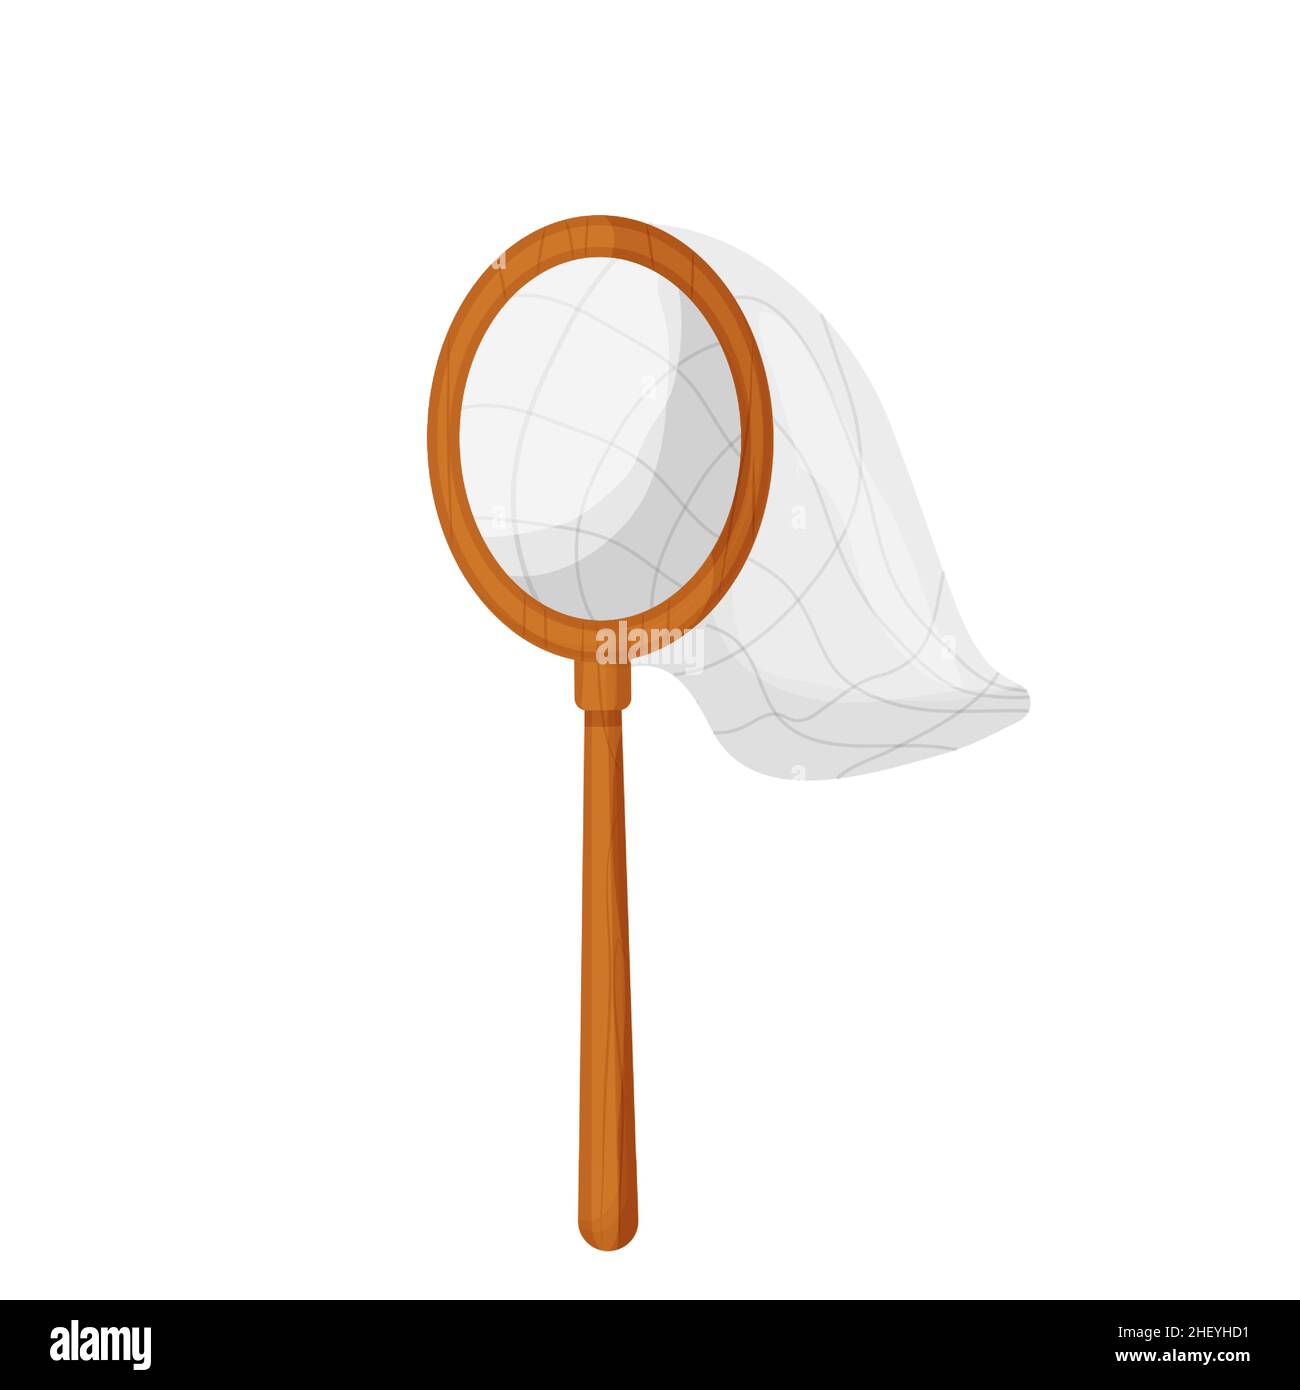 Net with wooden handle butterfly or fish catcher in cartoon style isolated on white background. Equipment for fishing, hobby. Vector illustration Stock Vector